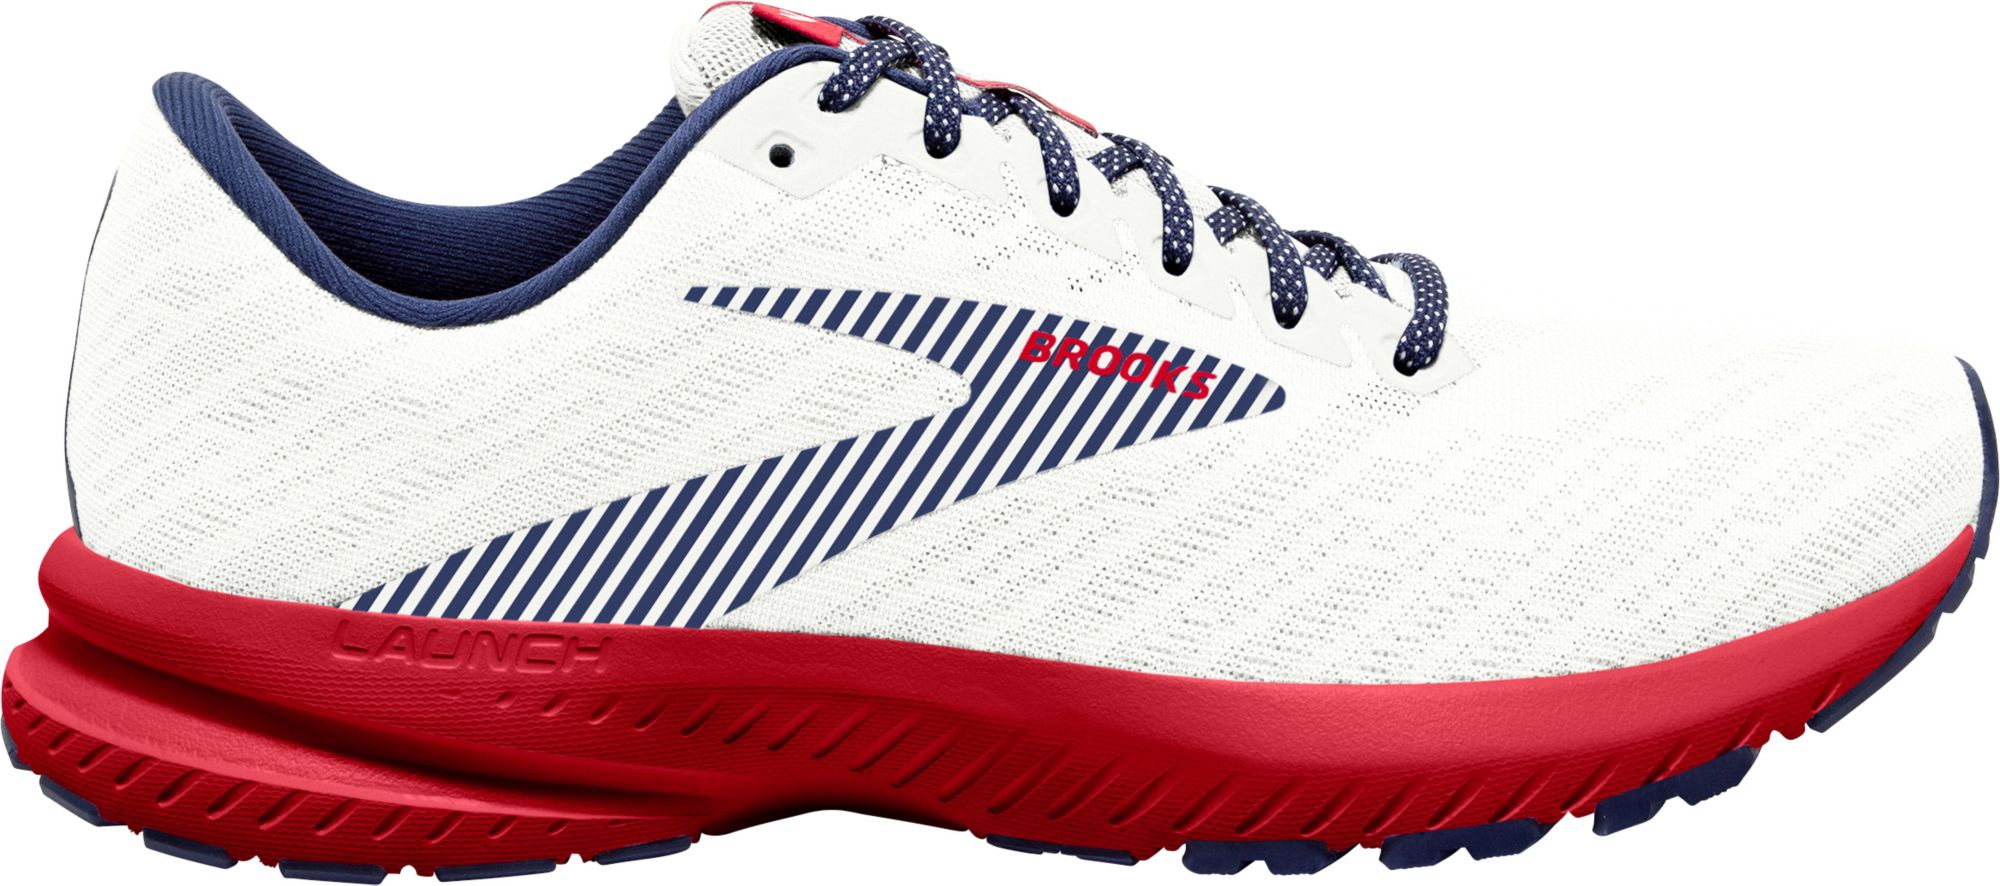 brooks red white and blue running shoes